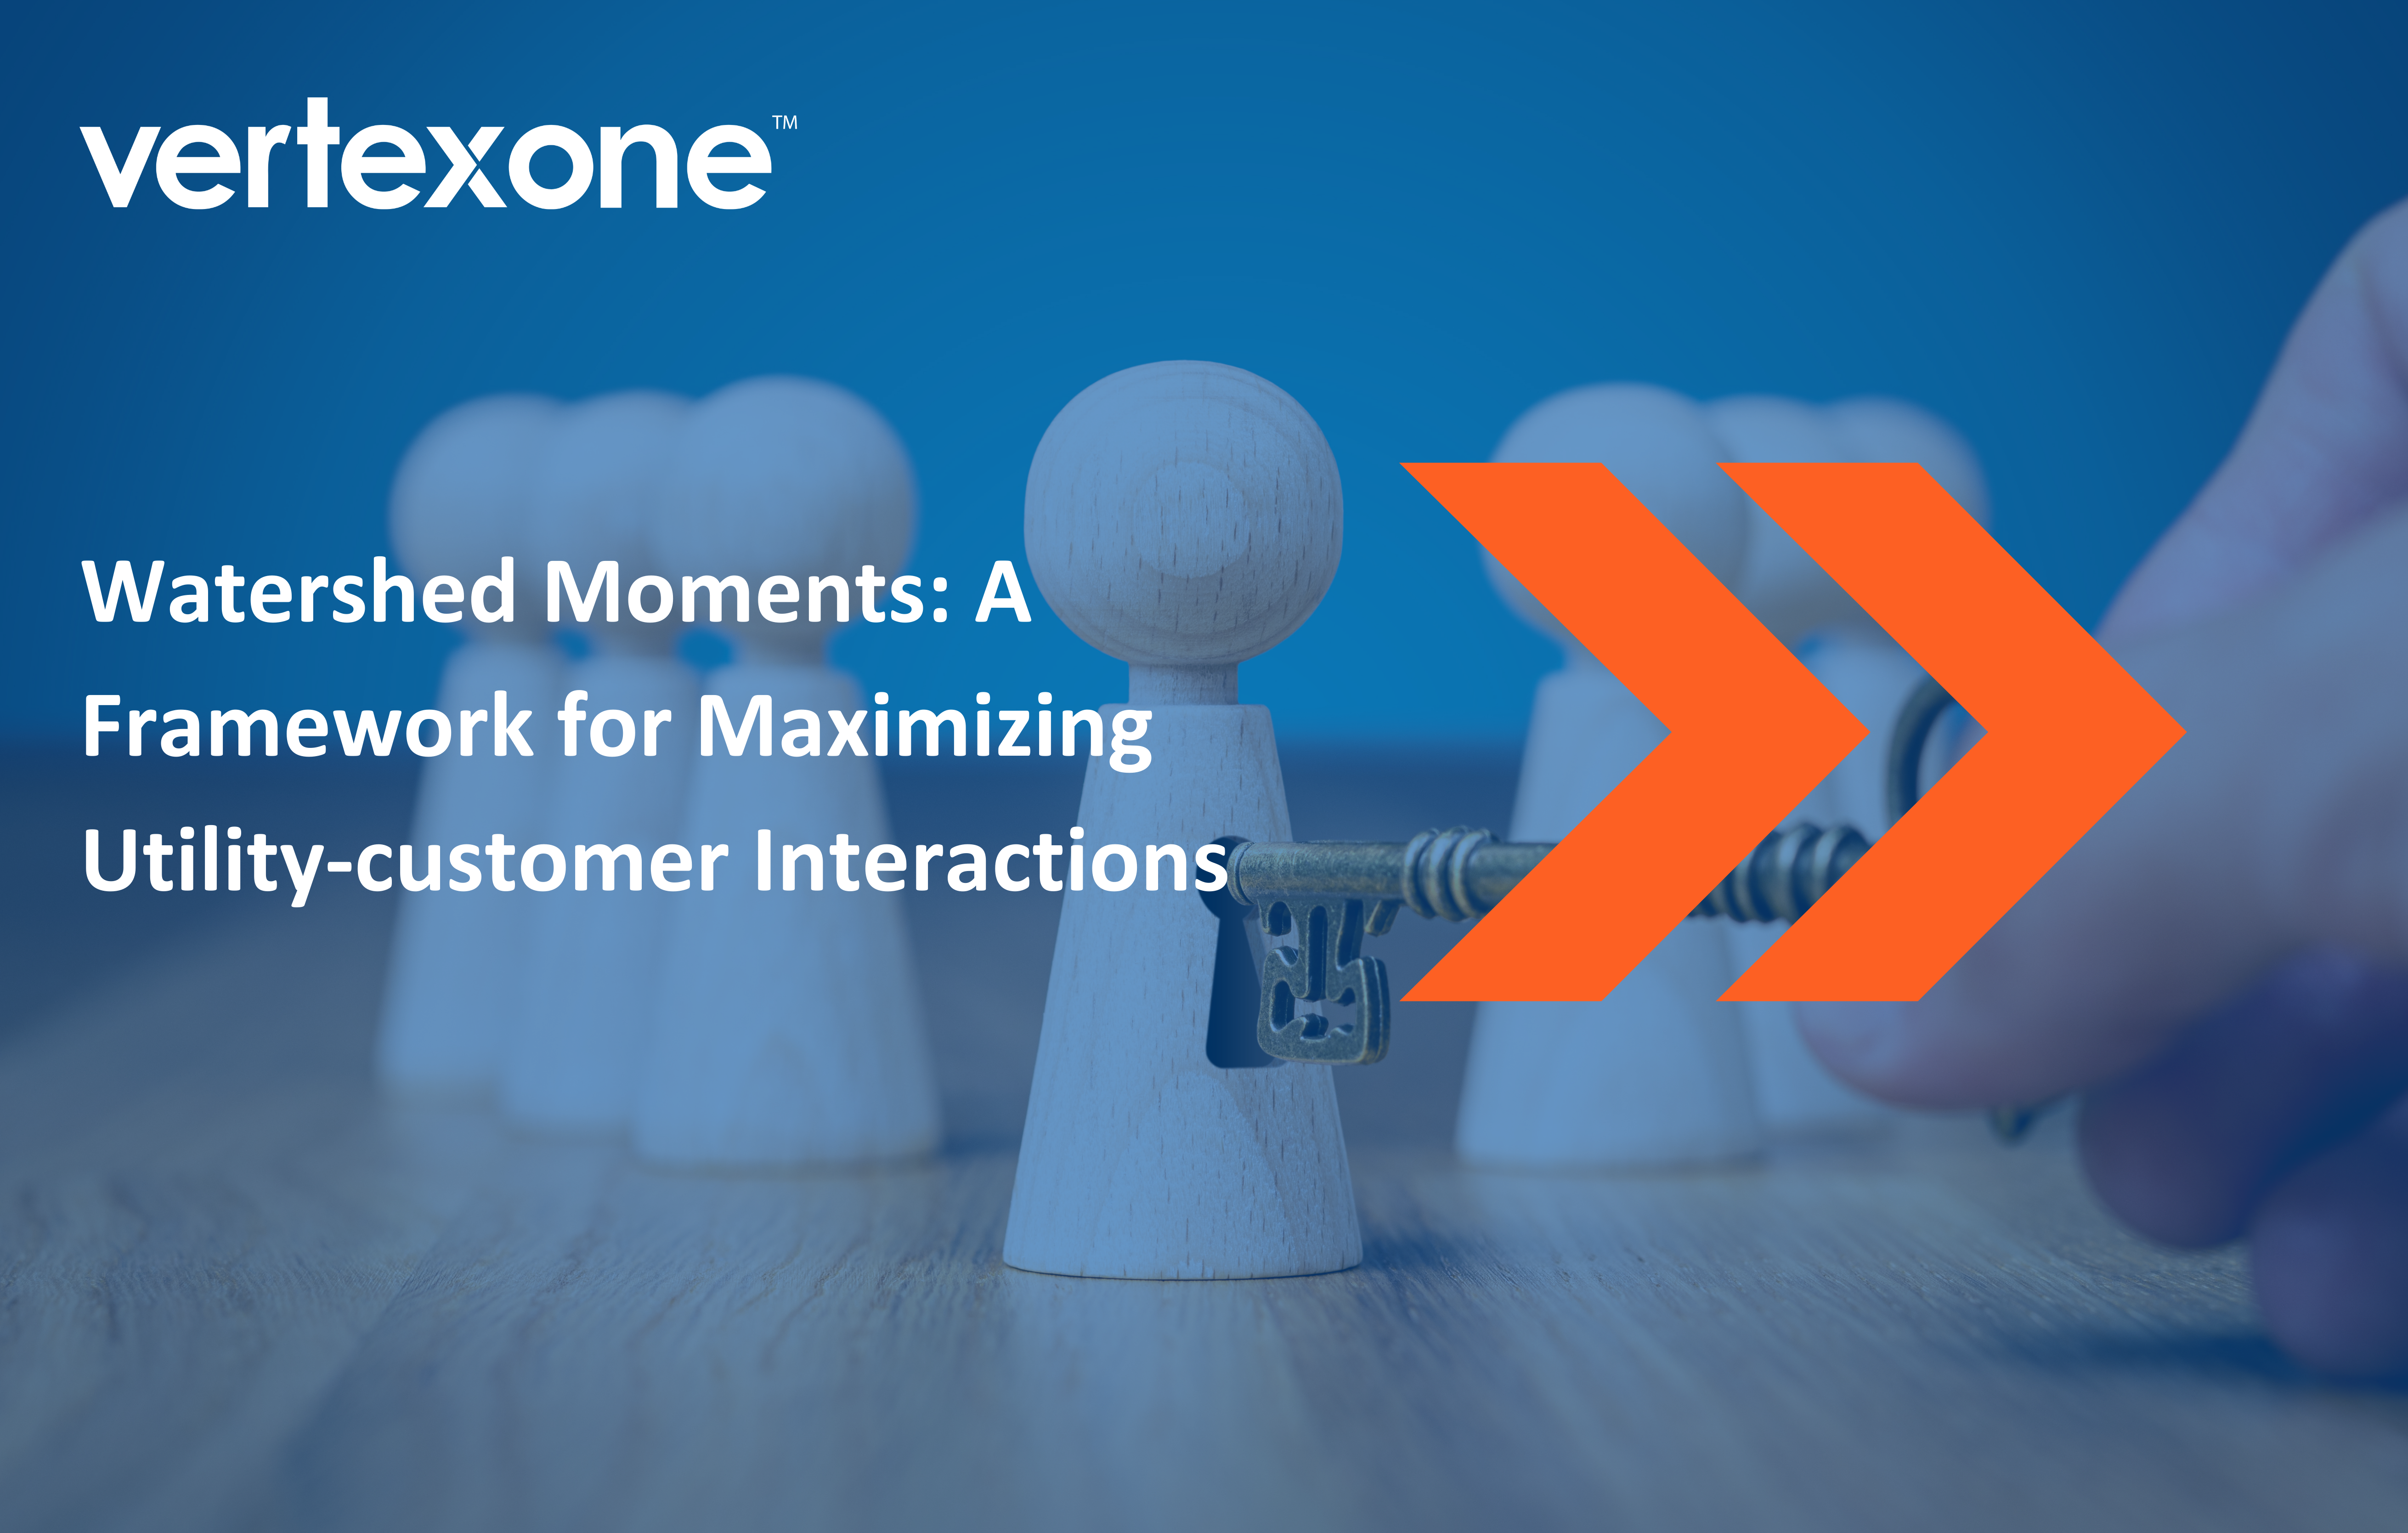 Watershed Moments: A framework for maximizing utility-customer interactions